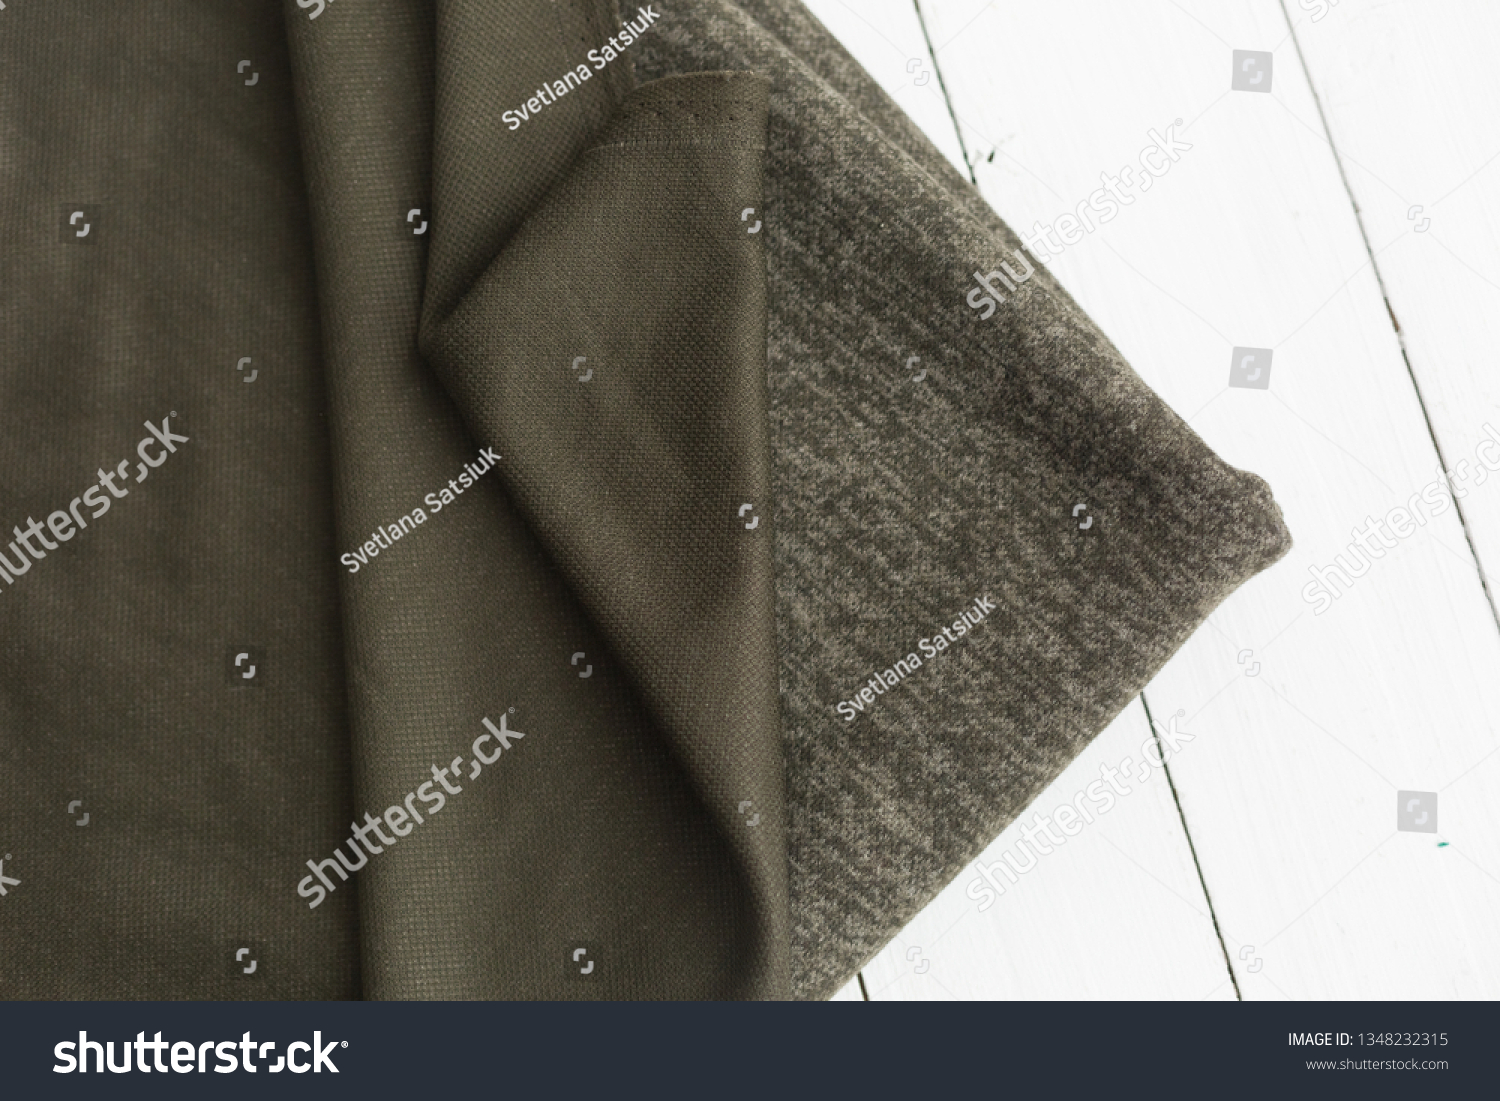 background texture fabric Angora. the fabric is knit. fabric Angora. the fabric is dark green color #1348232315